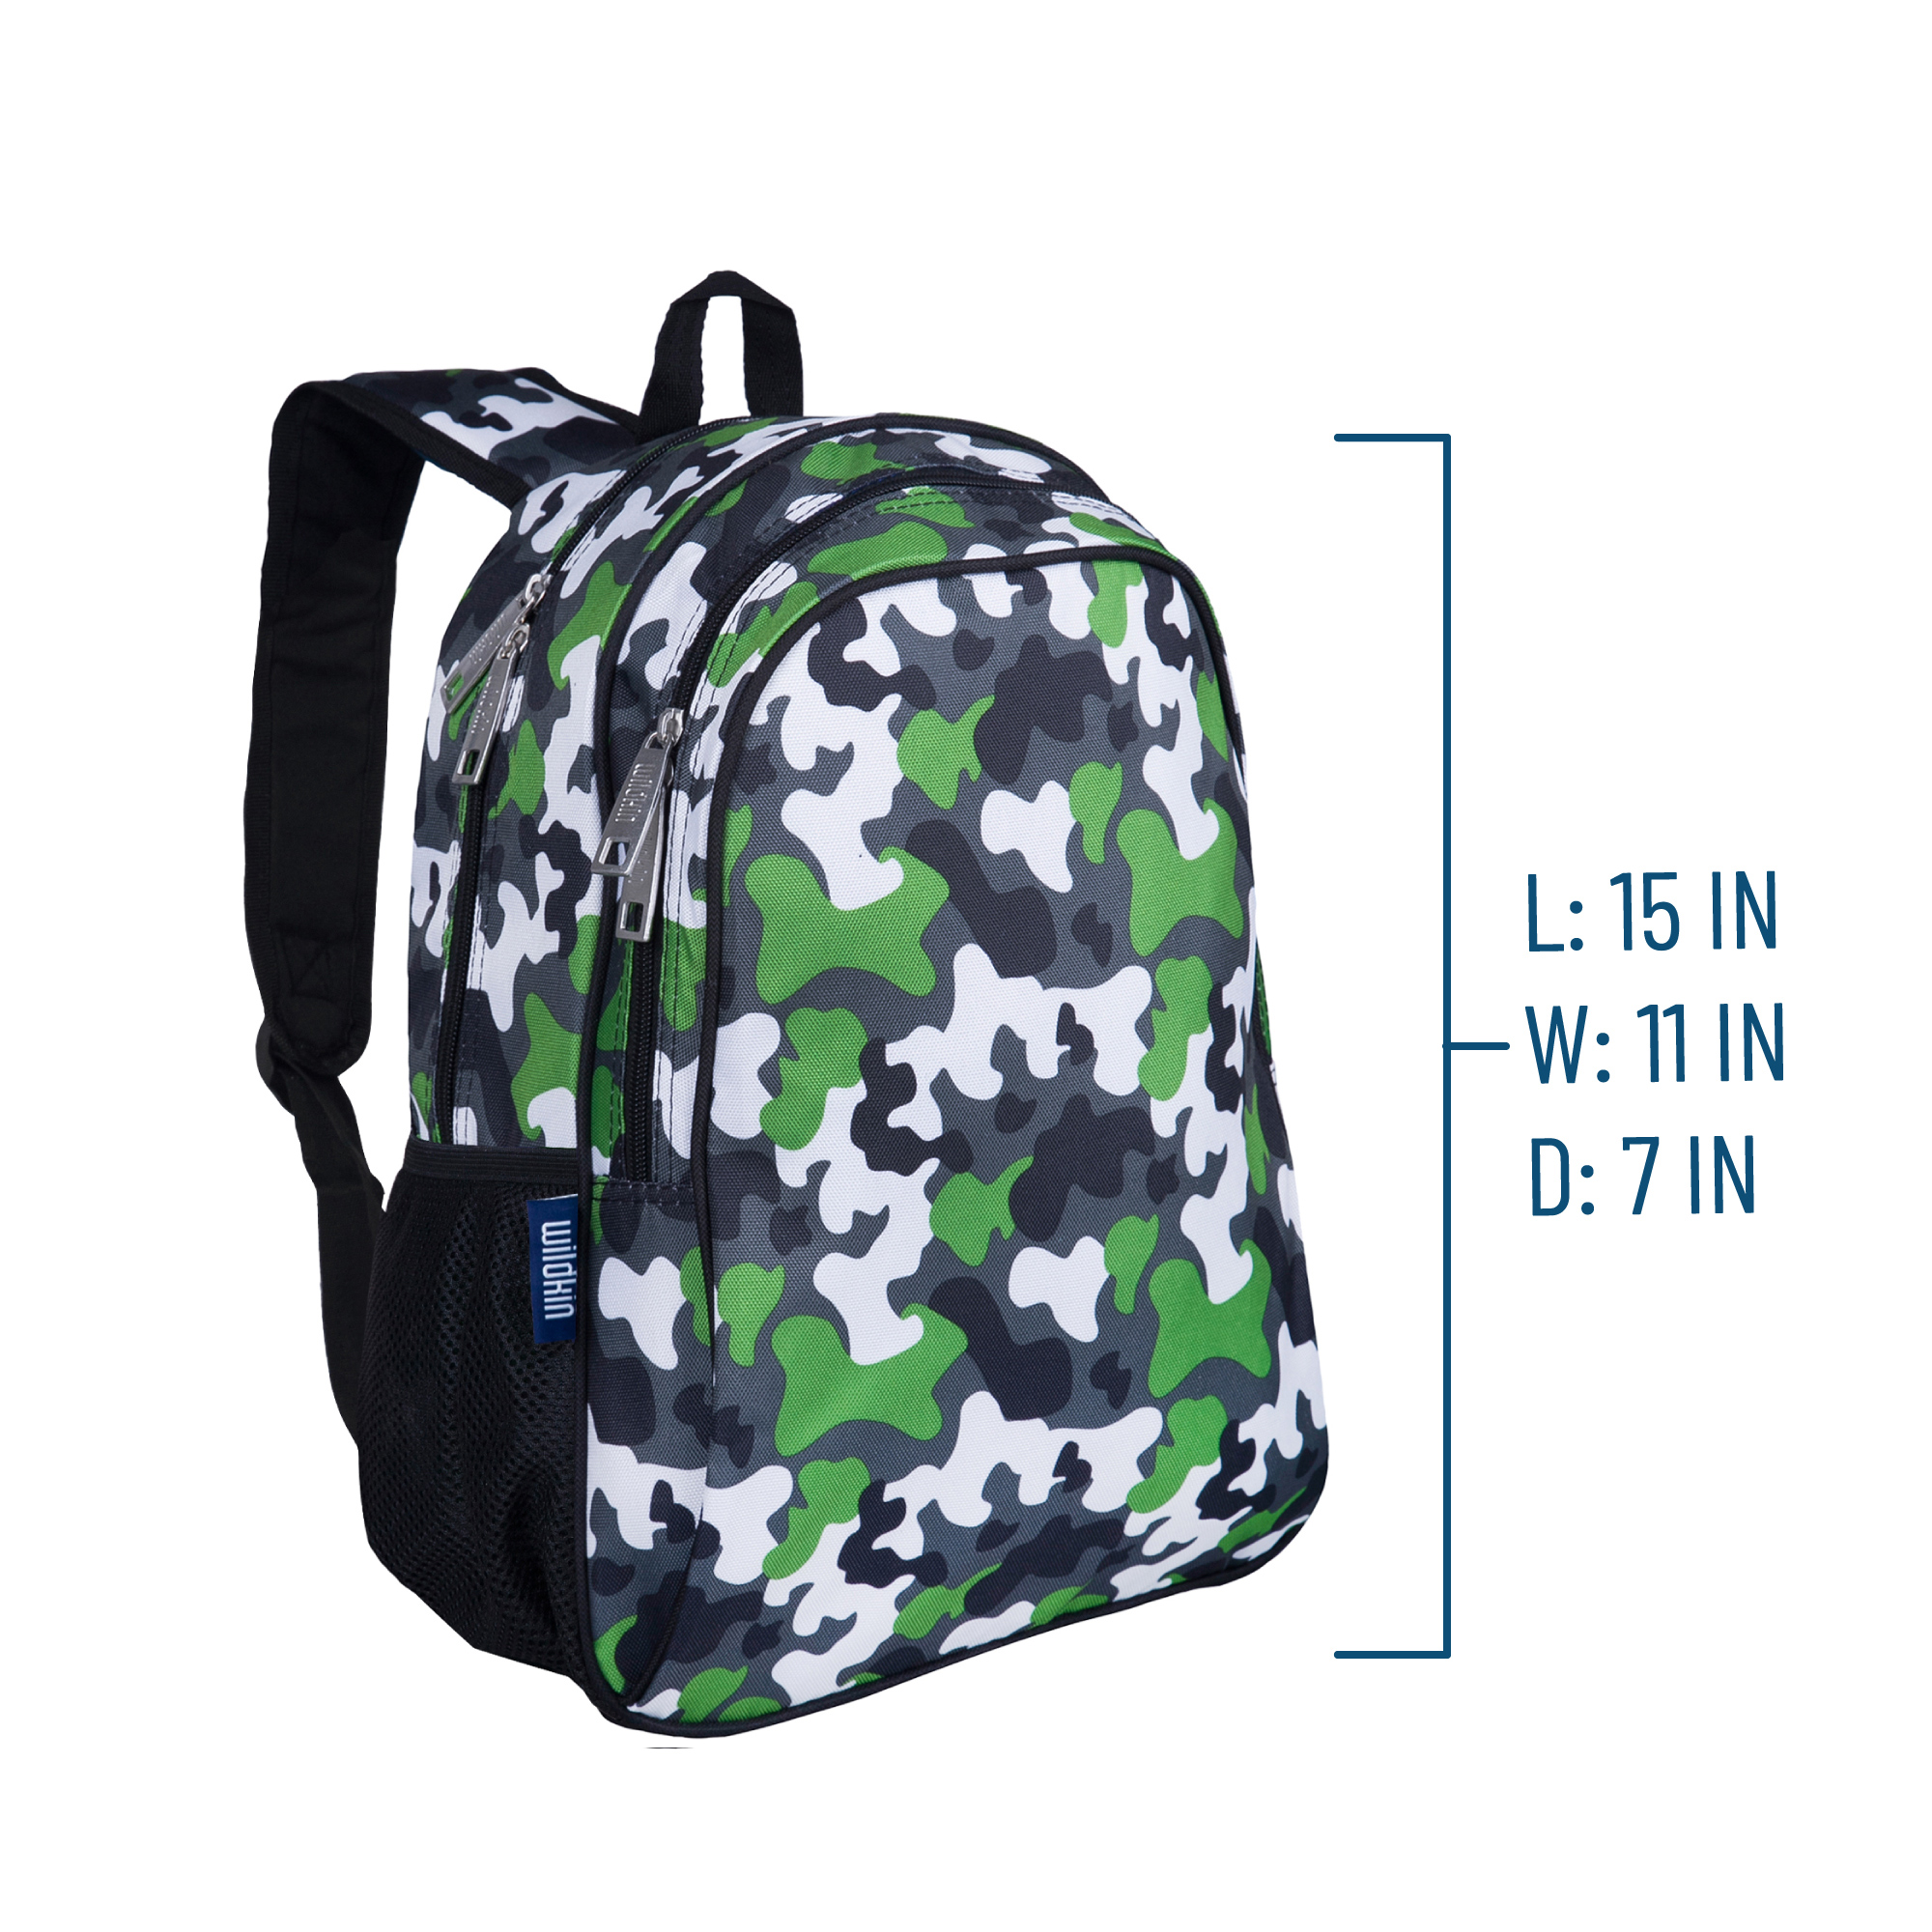 Wildkin Kids 15 Inch School and Travel Backpack for Boys and Girls (Green Camo) - image 5 of 7